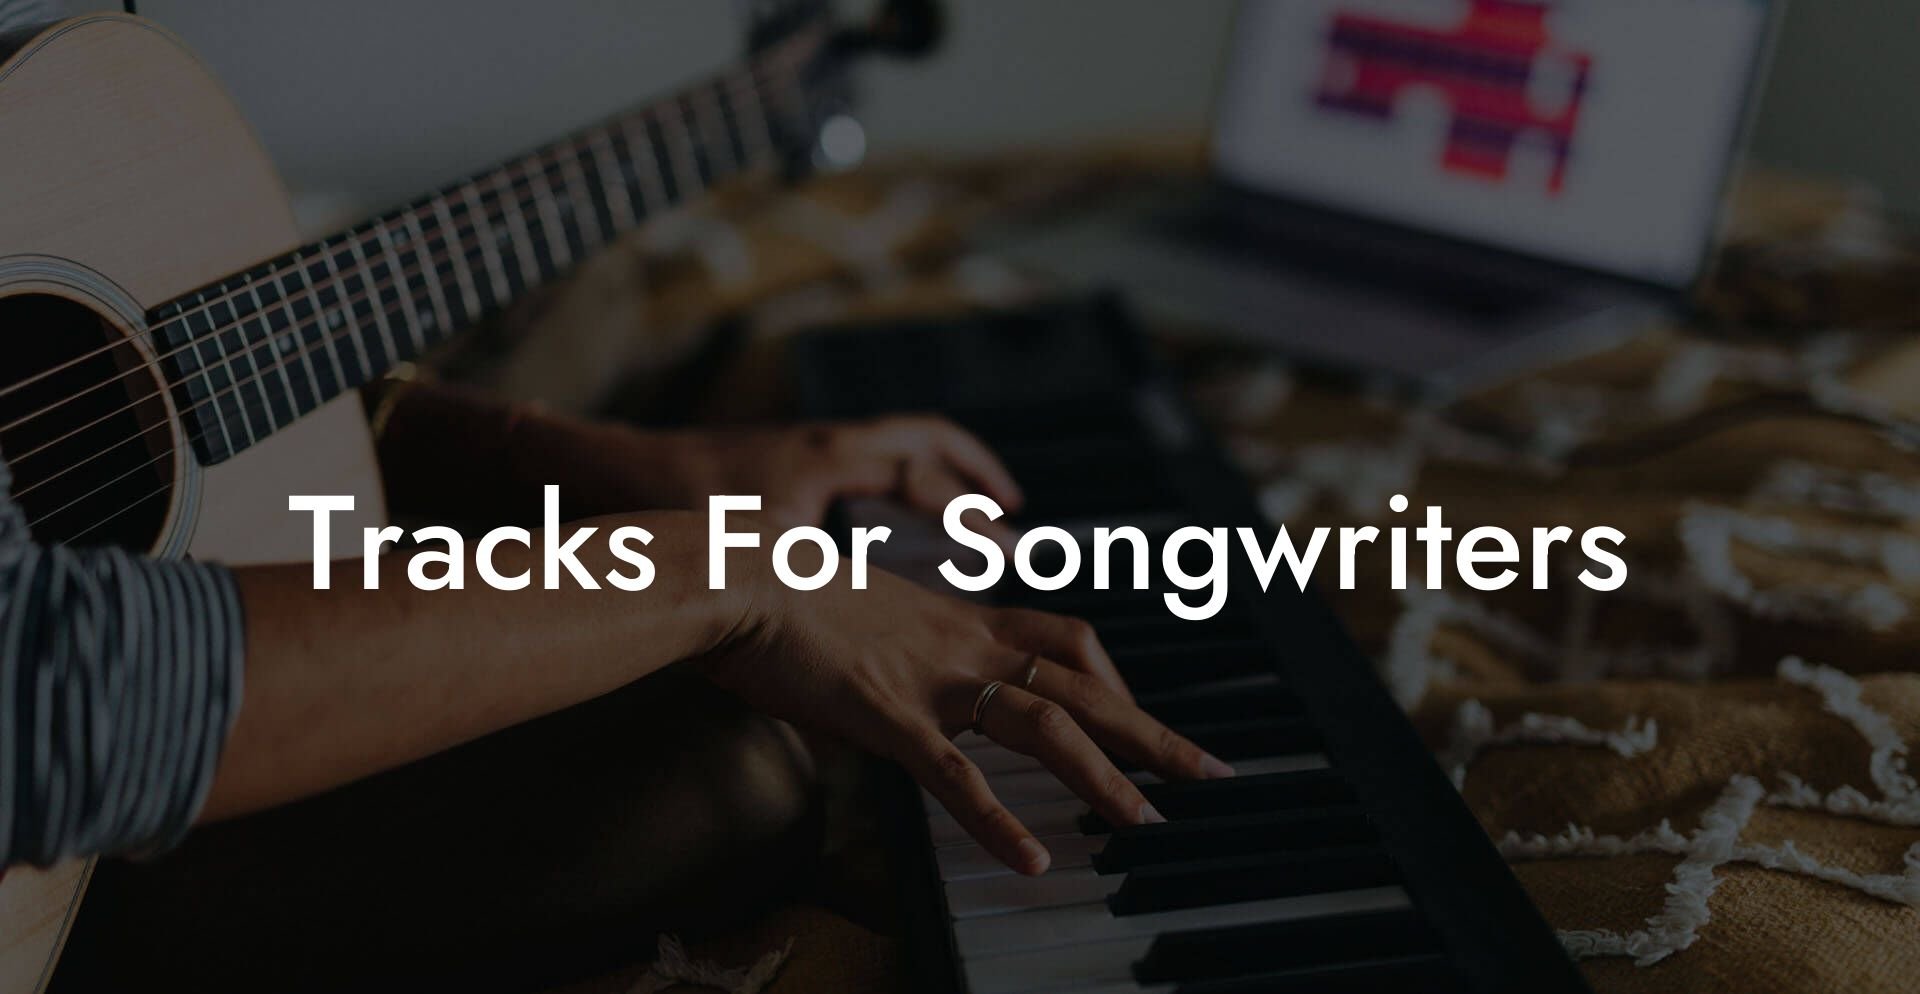 tracks for songwriters lyric assistant